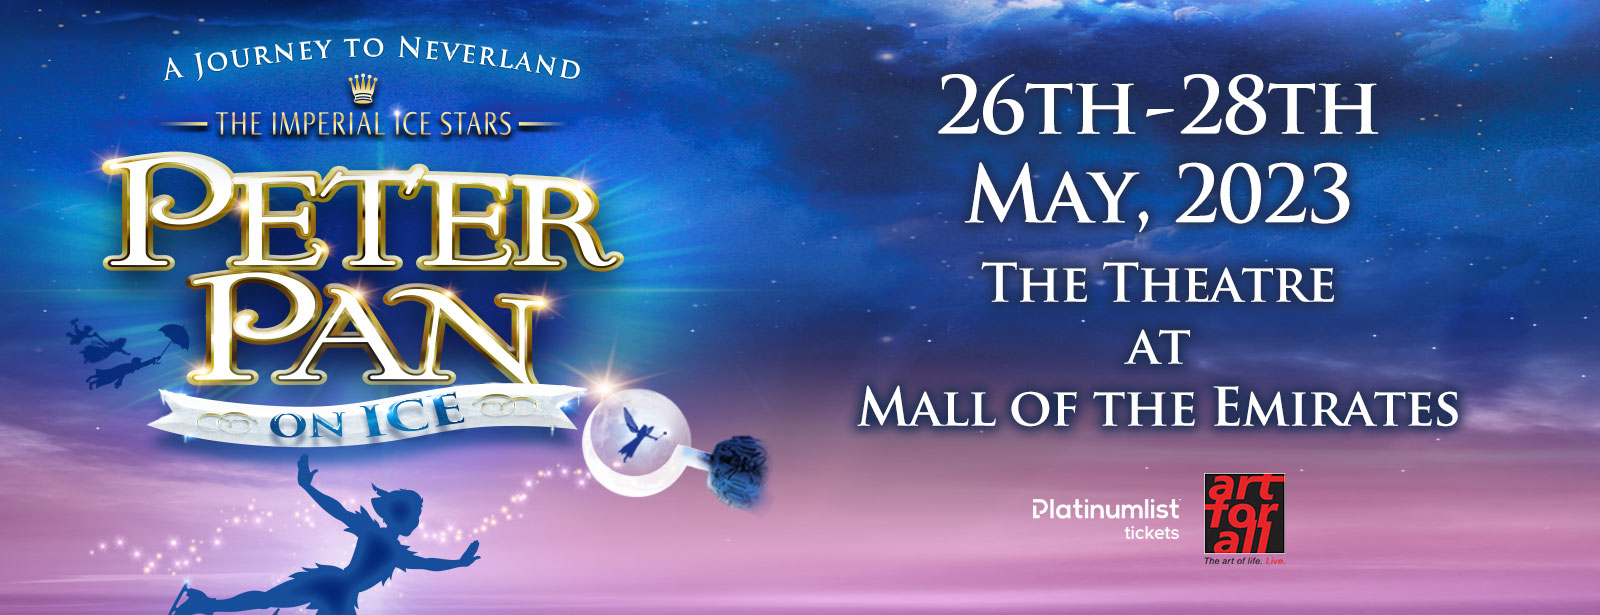 Peter Pan on Ice 2023 at The Theatre – Mall of the Emirates - Coming Soon in UAE